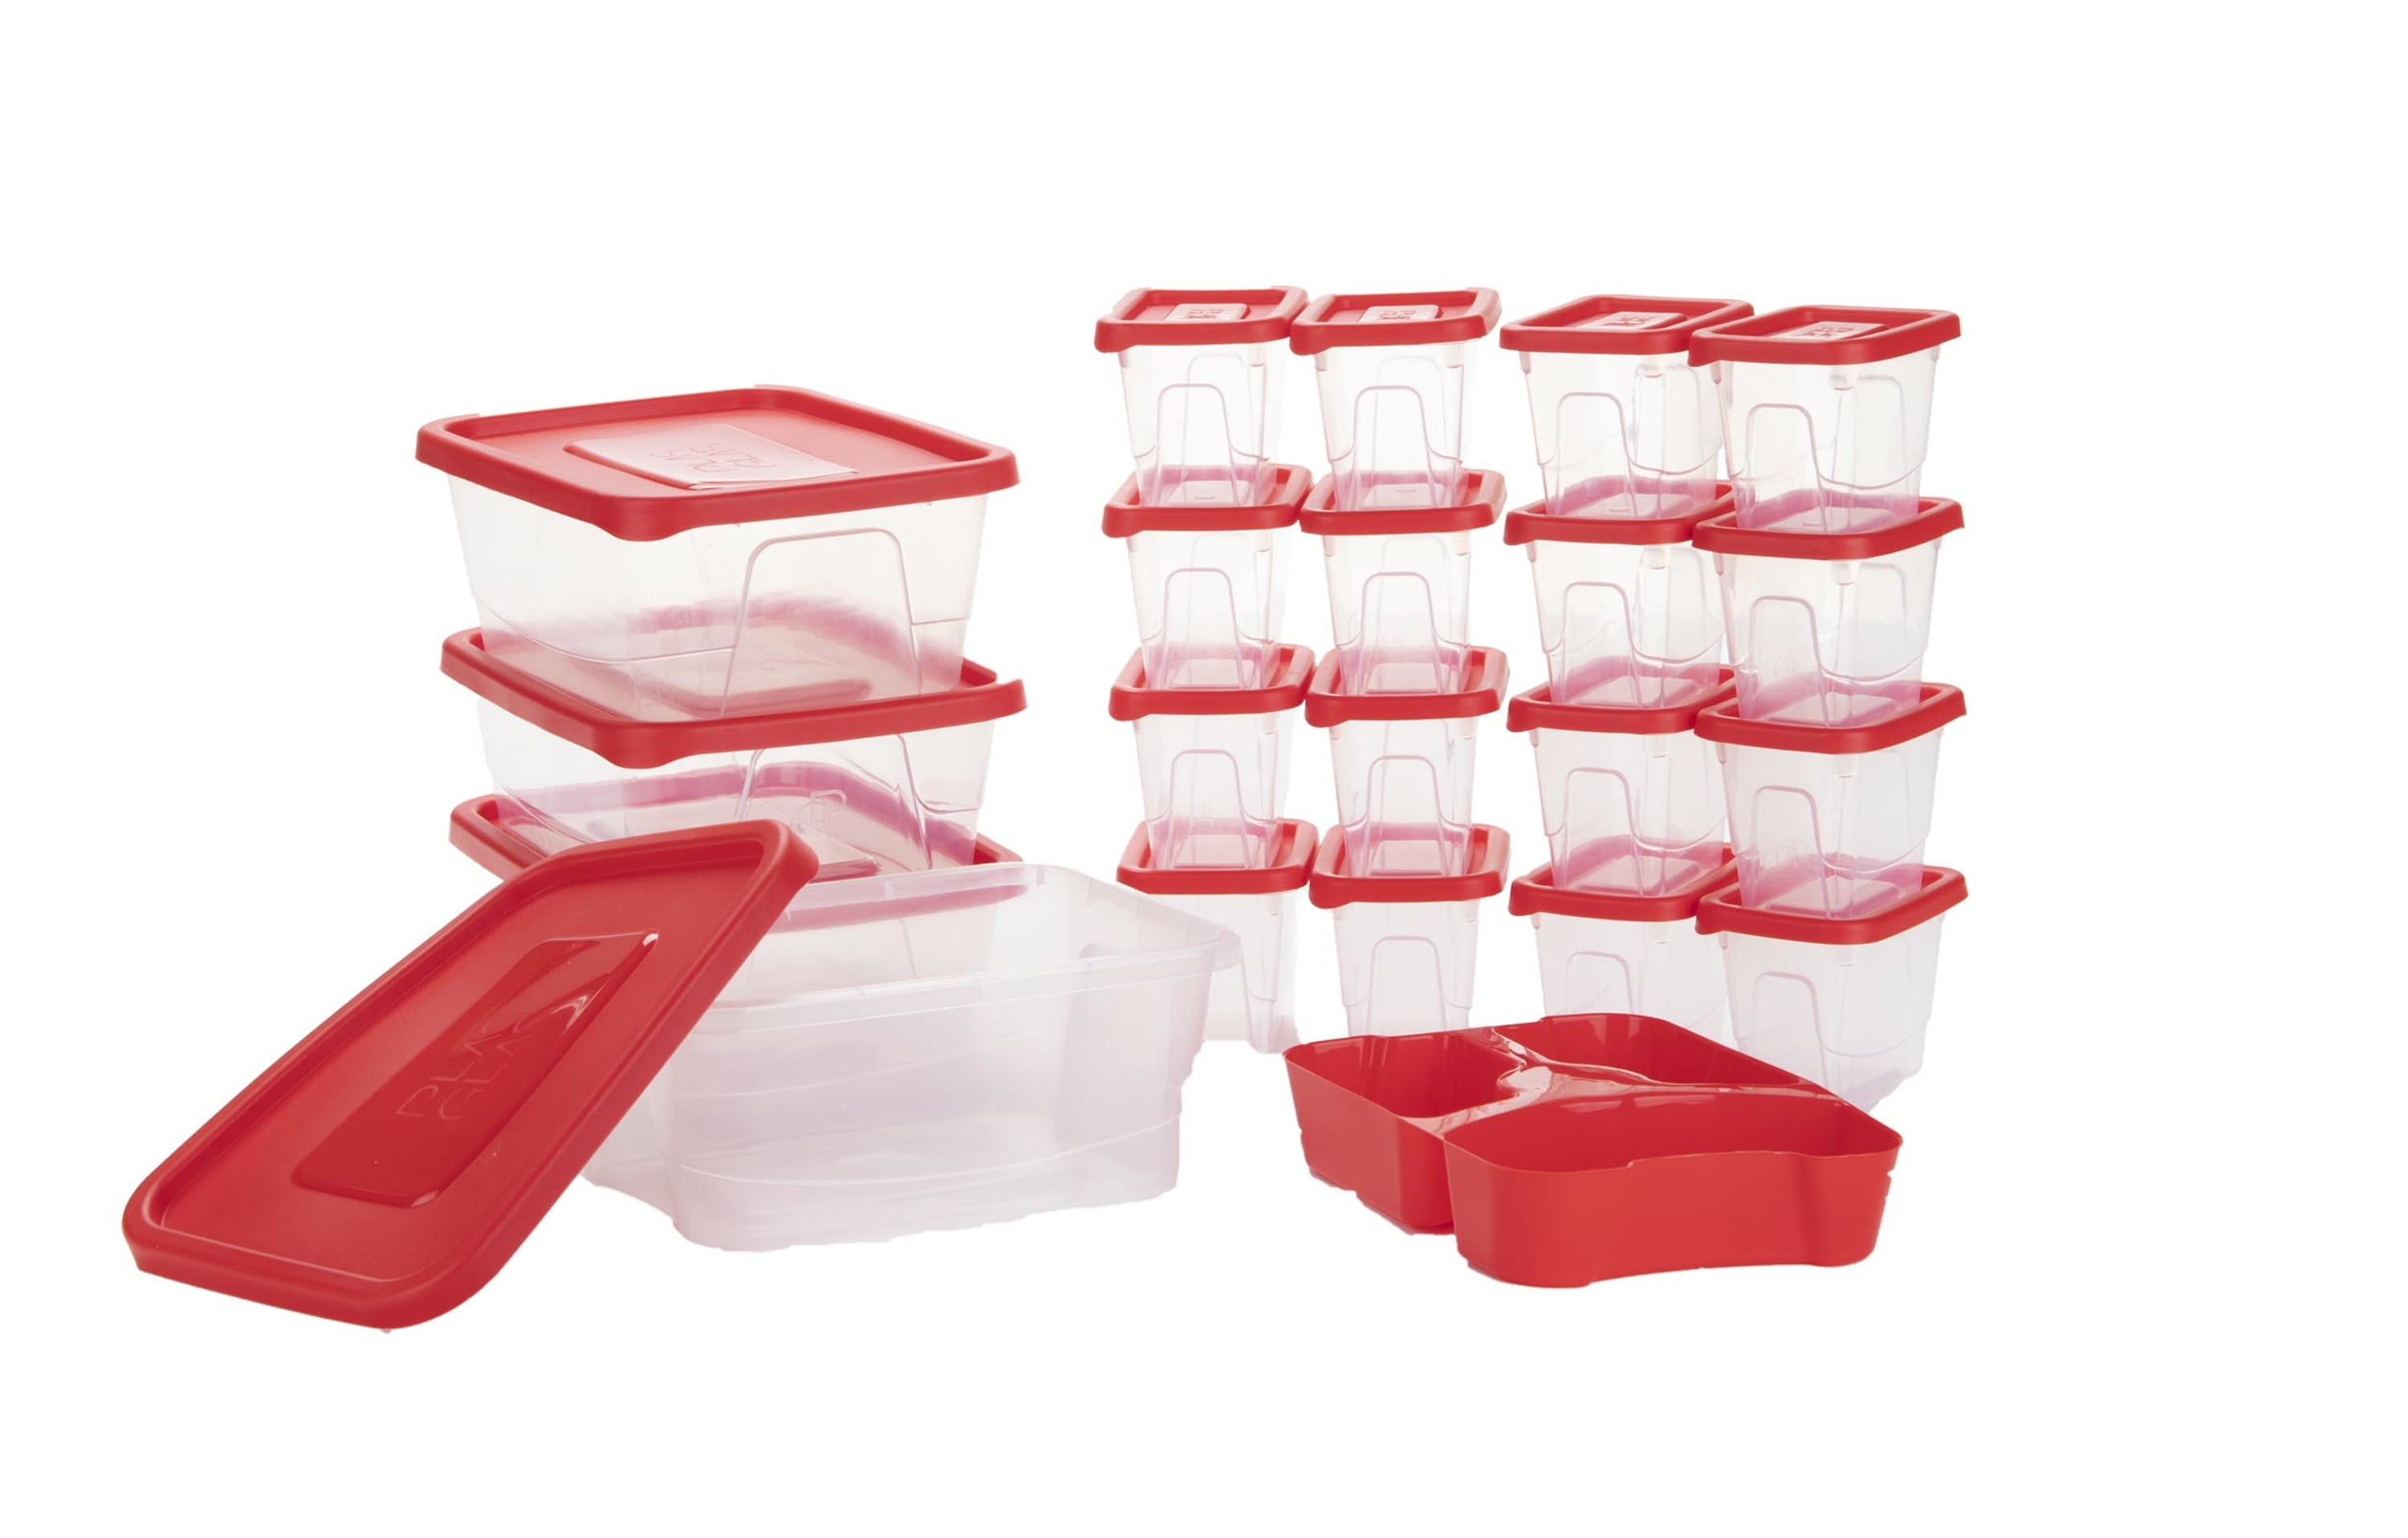 Meal Prep Containers Bento Box 20-pc. 1-Compartment Container Set